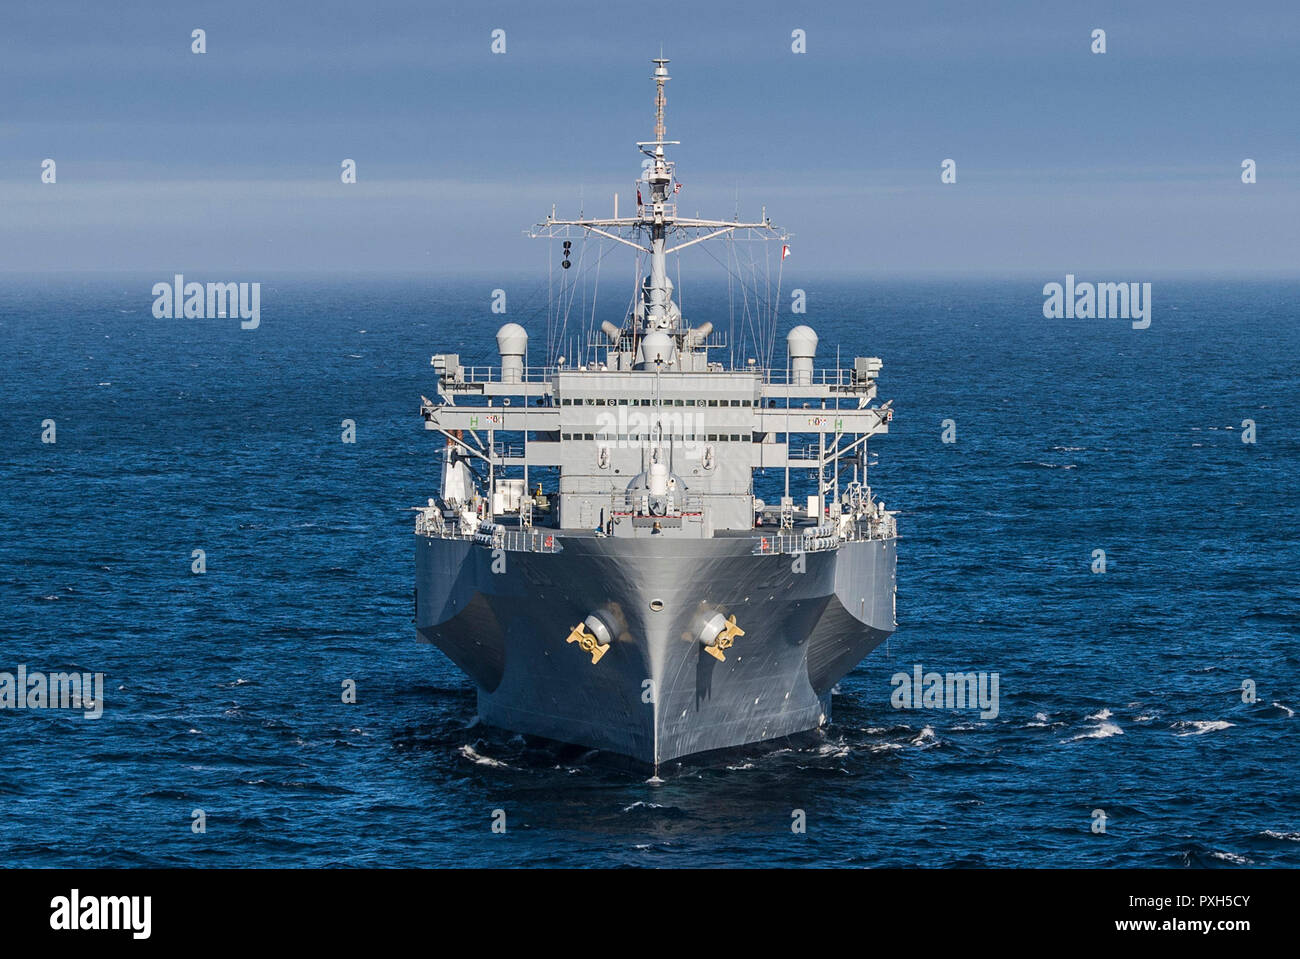 181020-N-KA046-0376 NORTH SEA (Oct. 20, 2018) The Blue Ridge-class command and control ship USS Mount Whitney (LCC 20) transits the North Sea, Oct. 20, 2018. Mount Whitney, forward-deployed to Gaeta, Italy, operates with a combined crew of U.S. Navy Sailors and Military Sealift Command civil service mariners. (U.S. Navy photo by Mass Communication Specialist 2nd Class James R. Turner/Released) Stock Photo